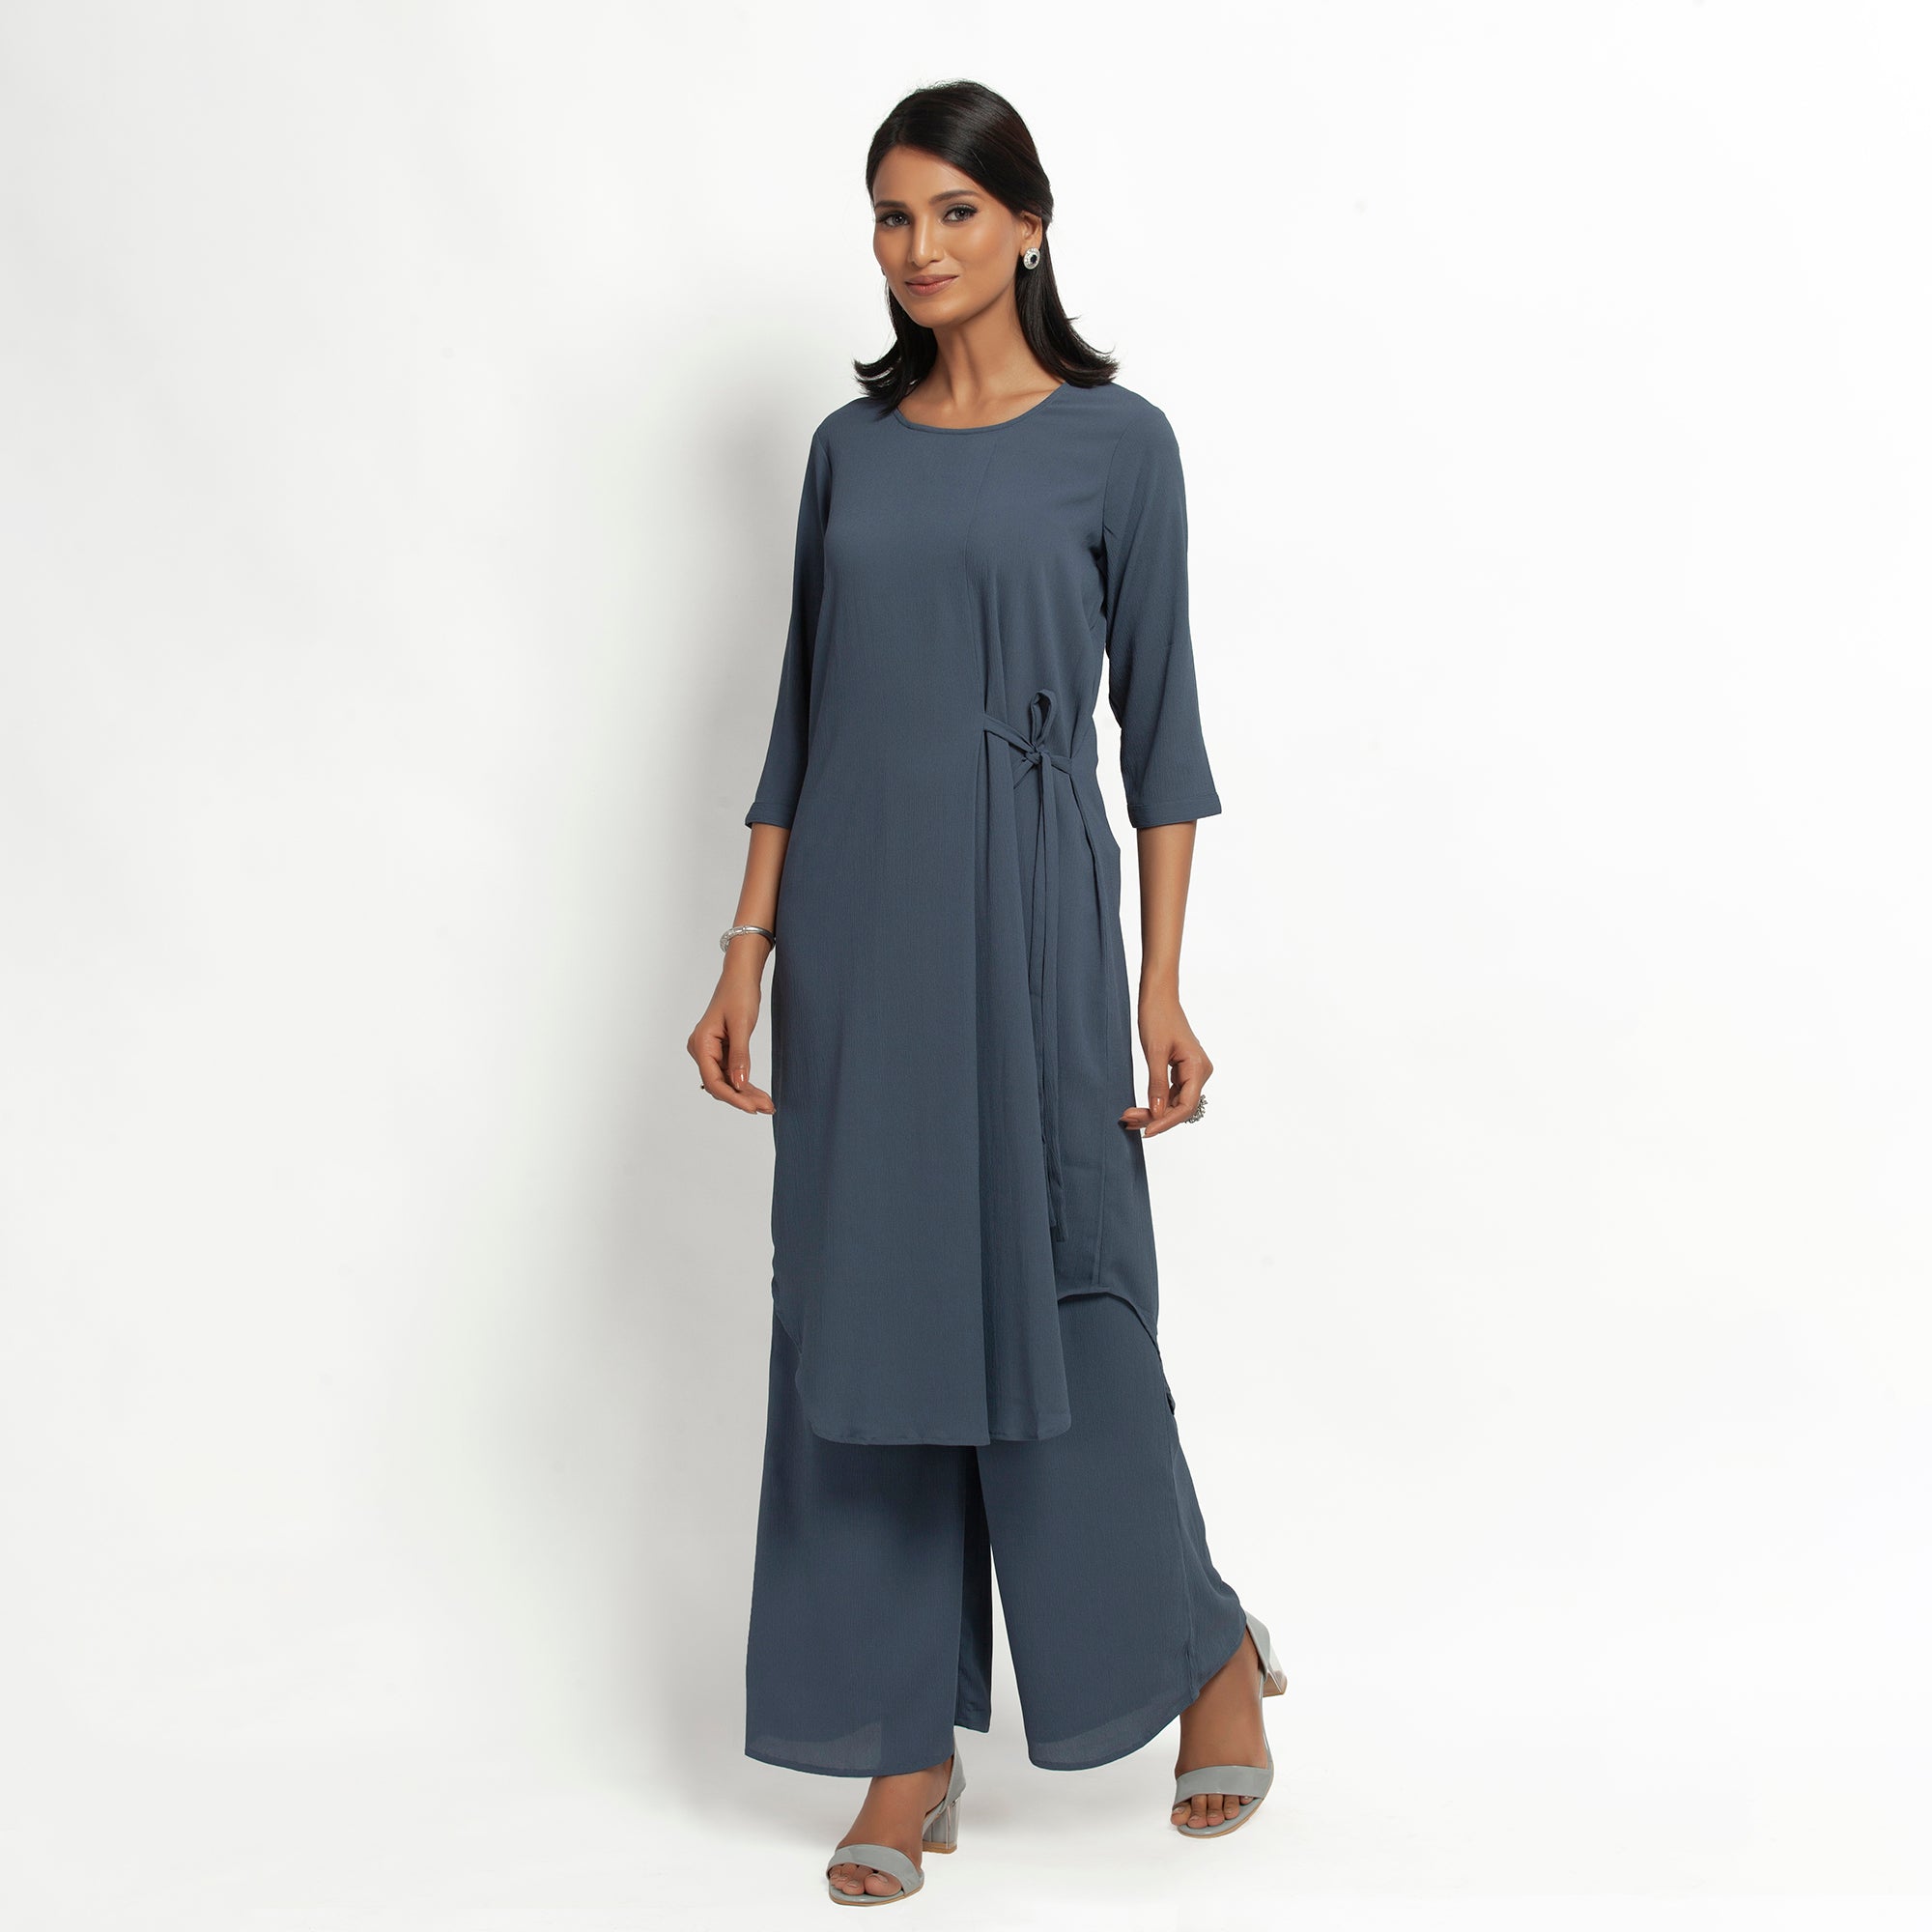 Stone Blue Crepe Tunic With Tie Knot